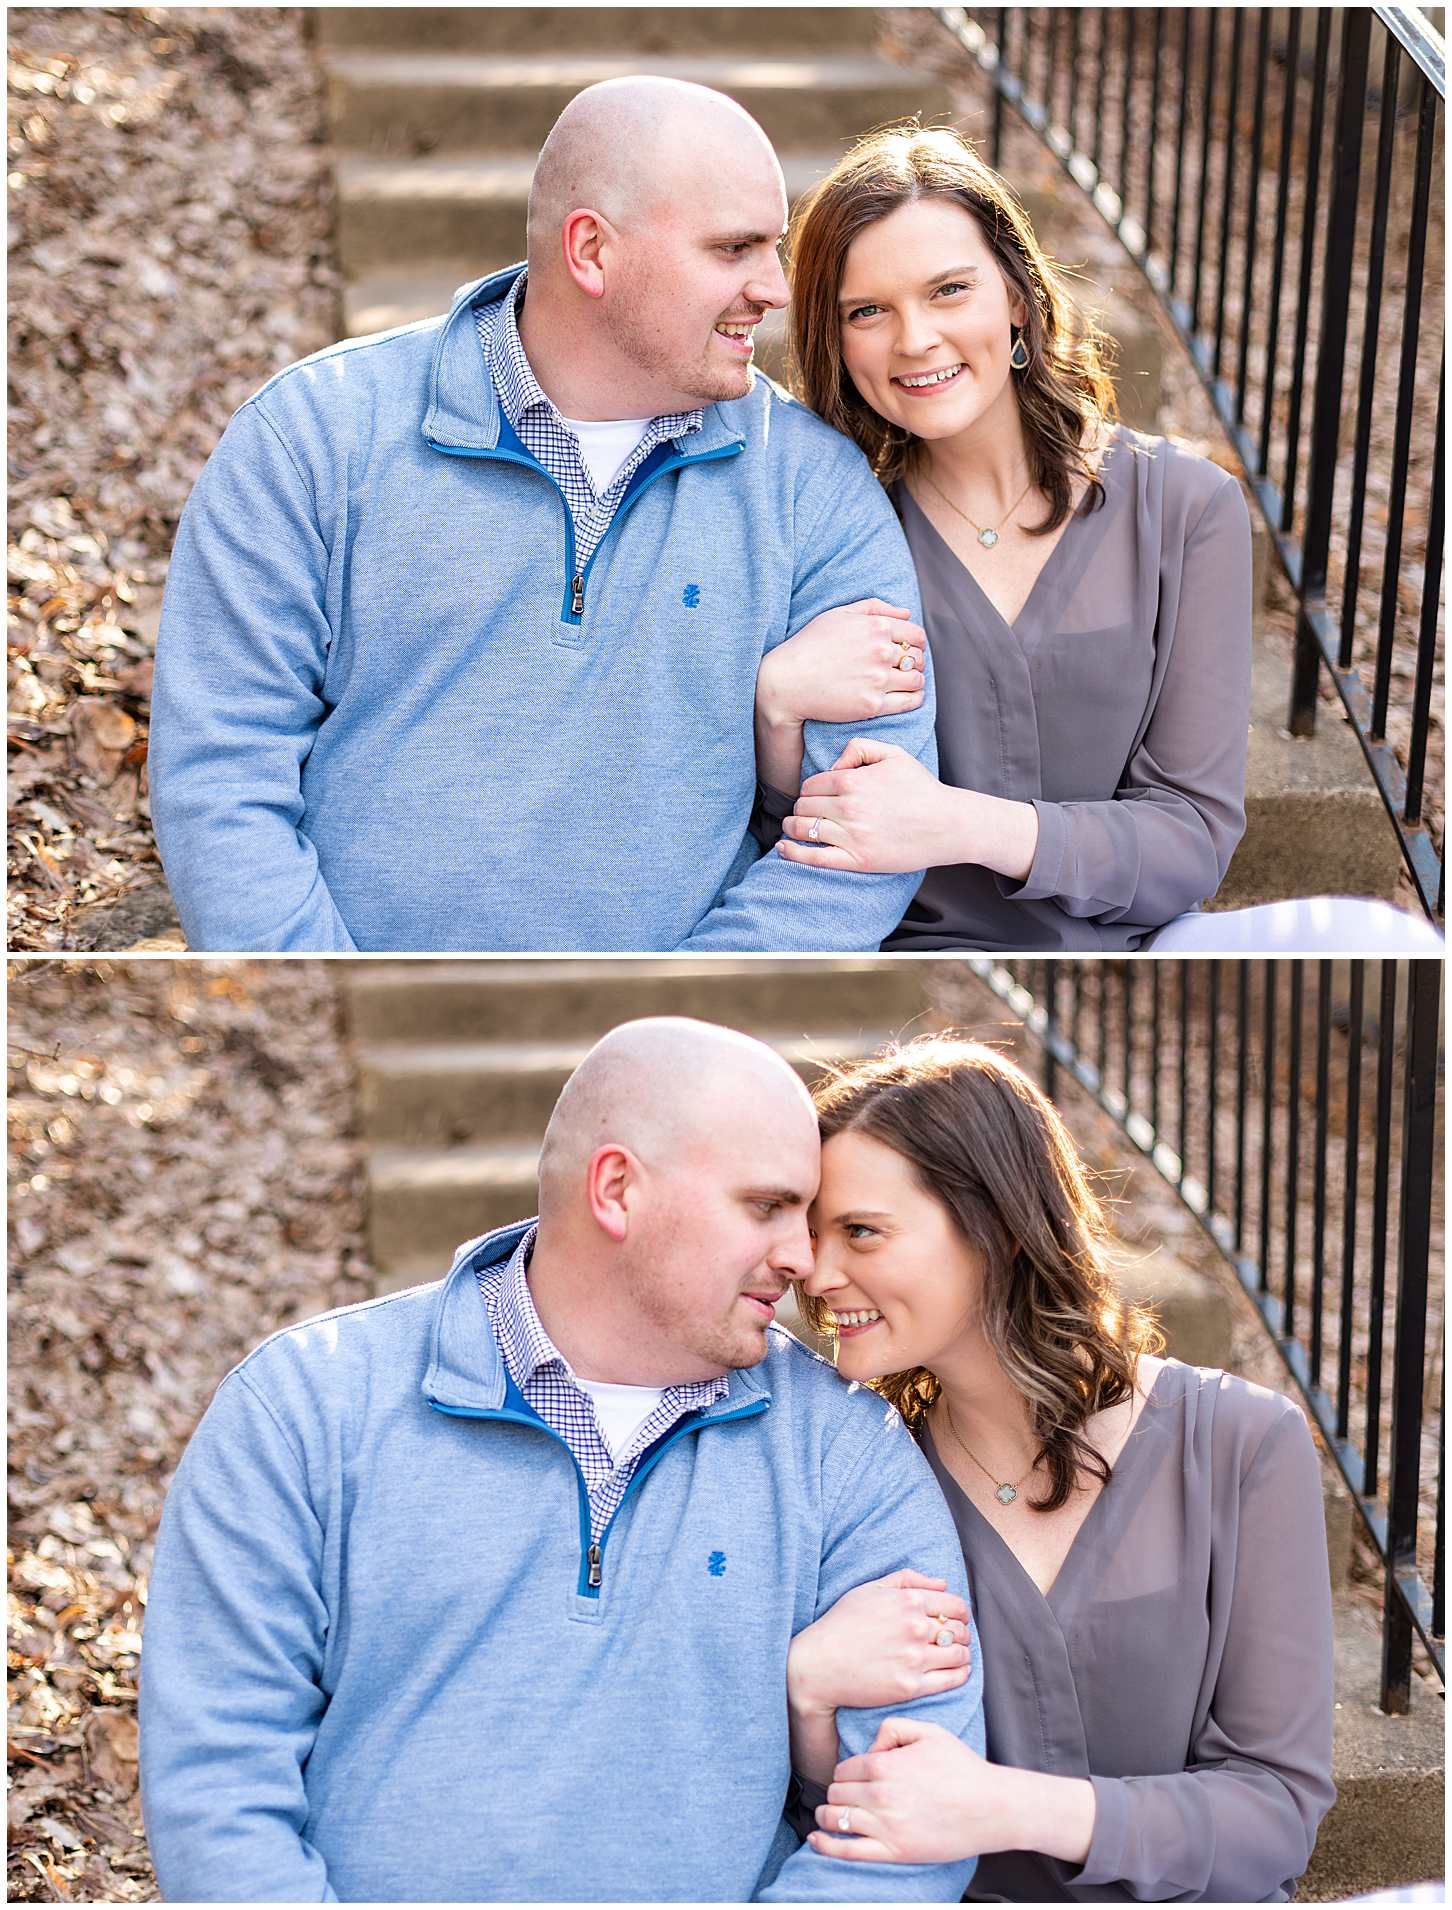 Downtown-Naperville-Engagement-Pictures-on-Stairs-Candid-Spring-Couples-Photos